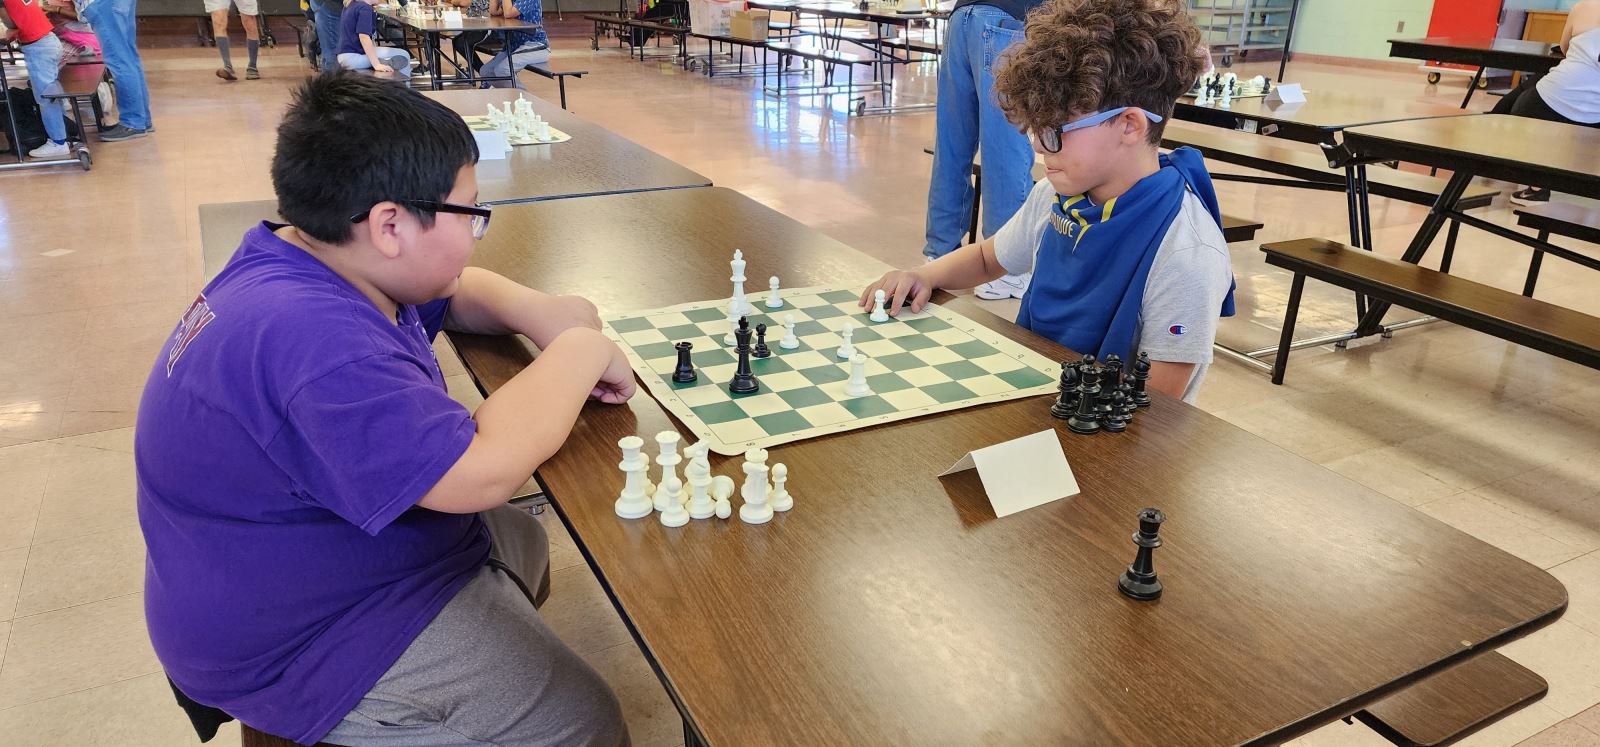 Two boys in glasses play chess